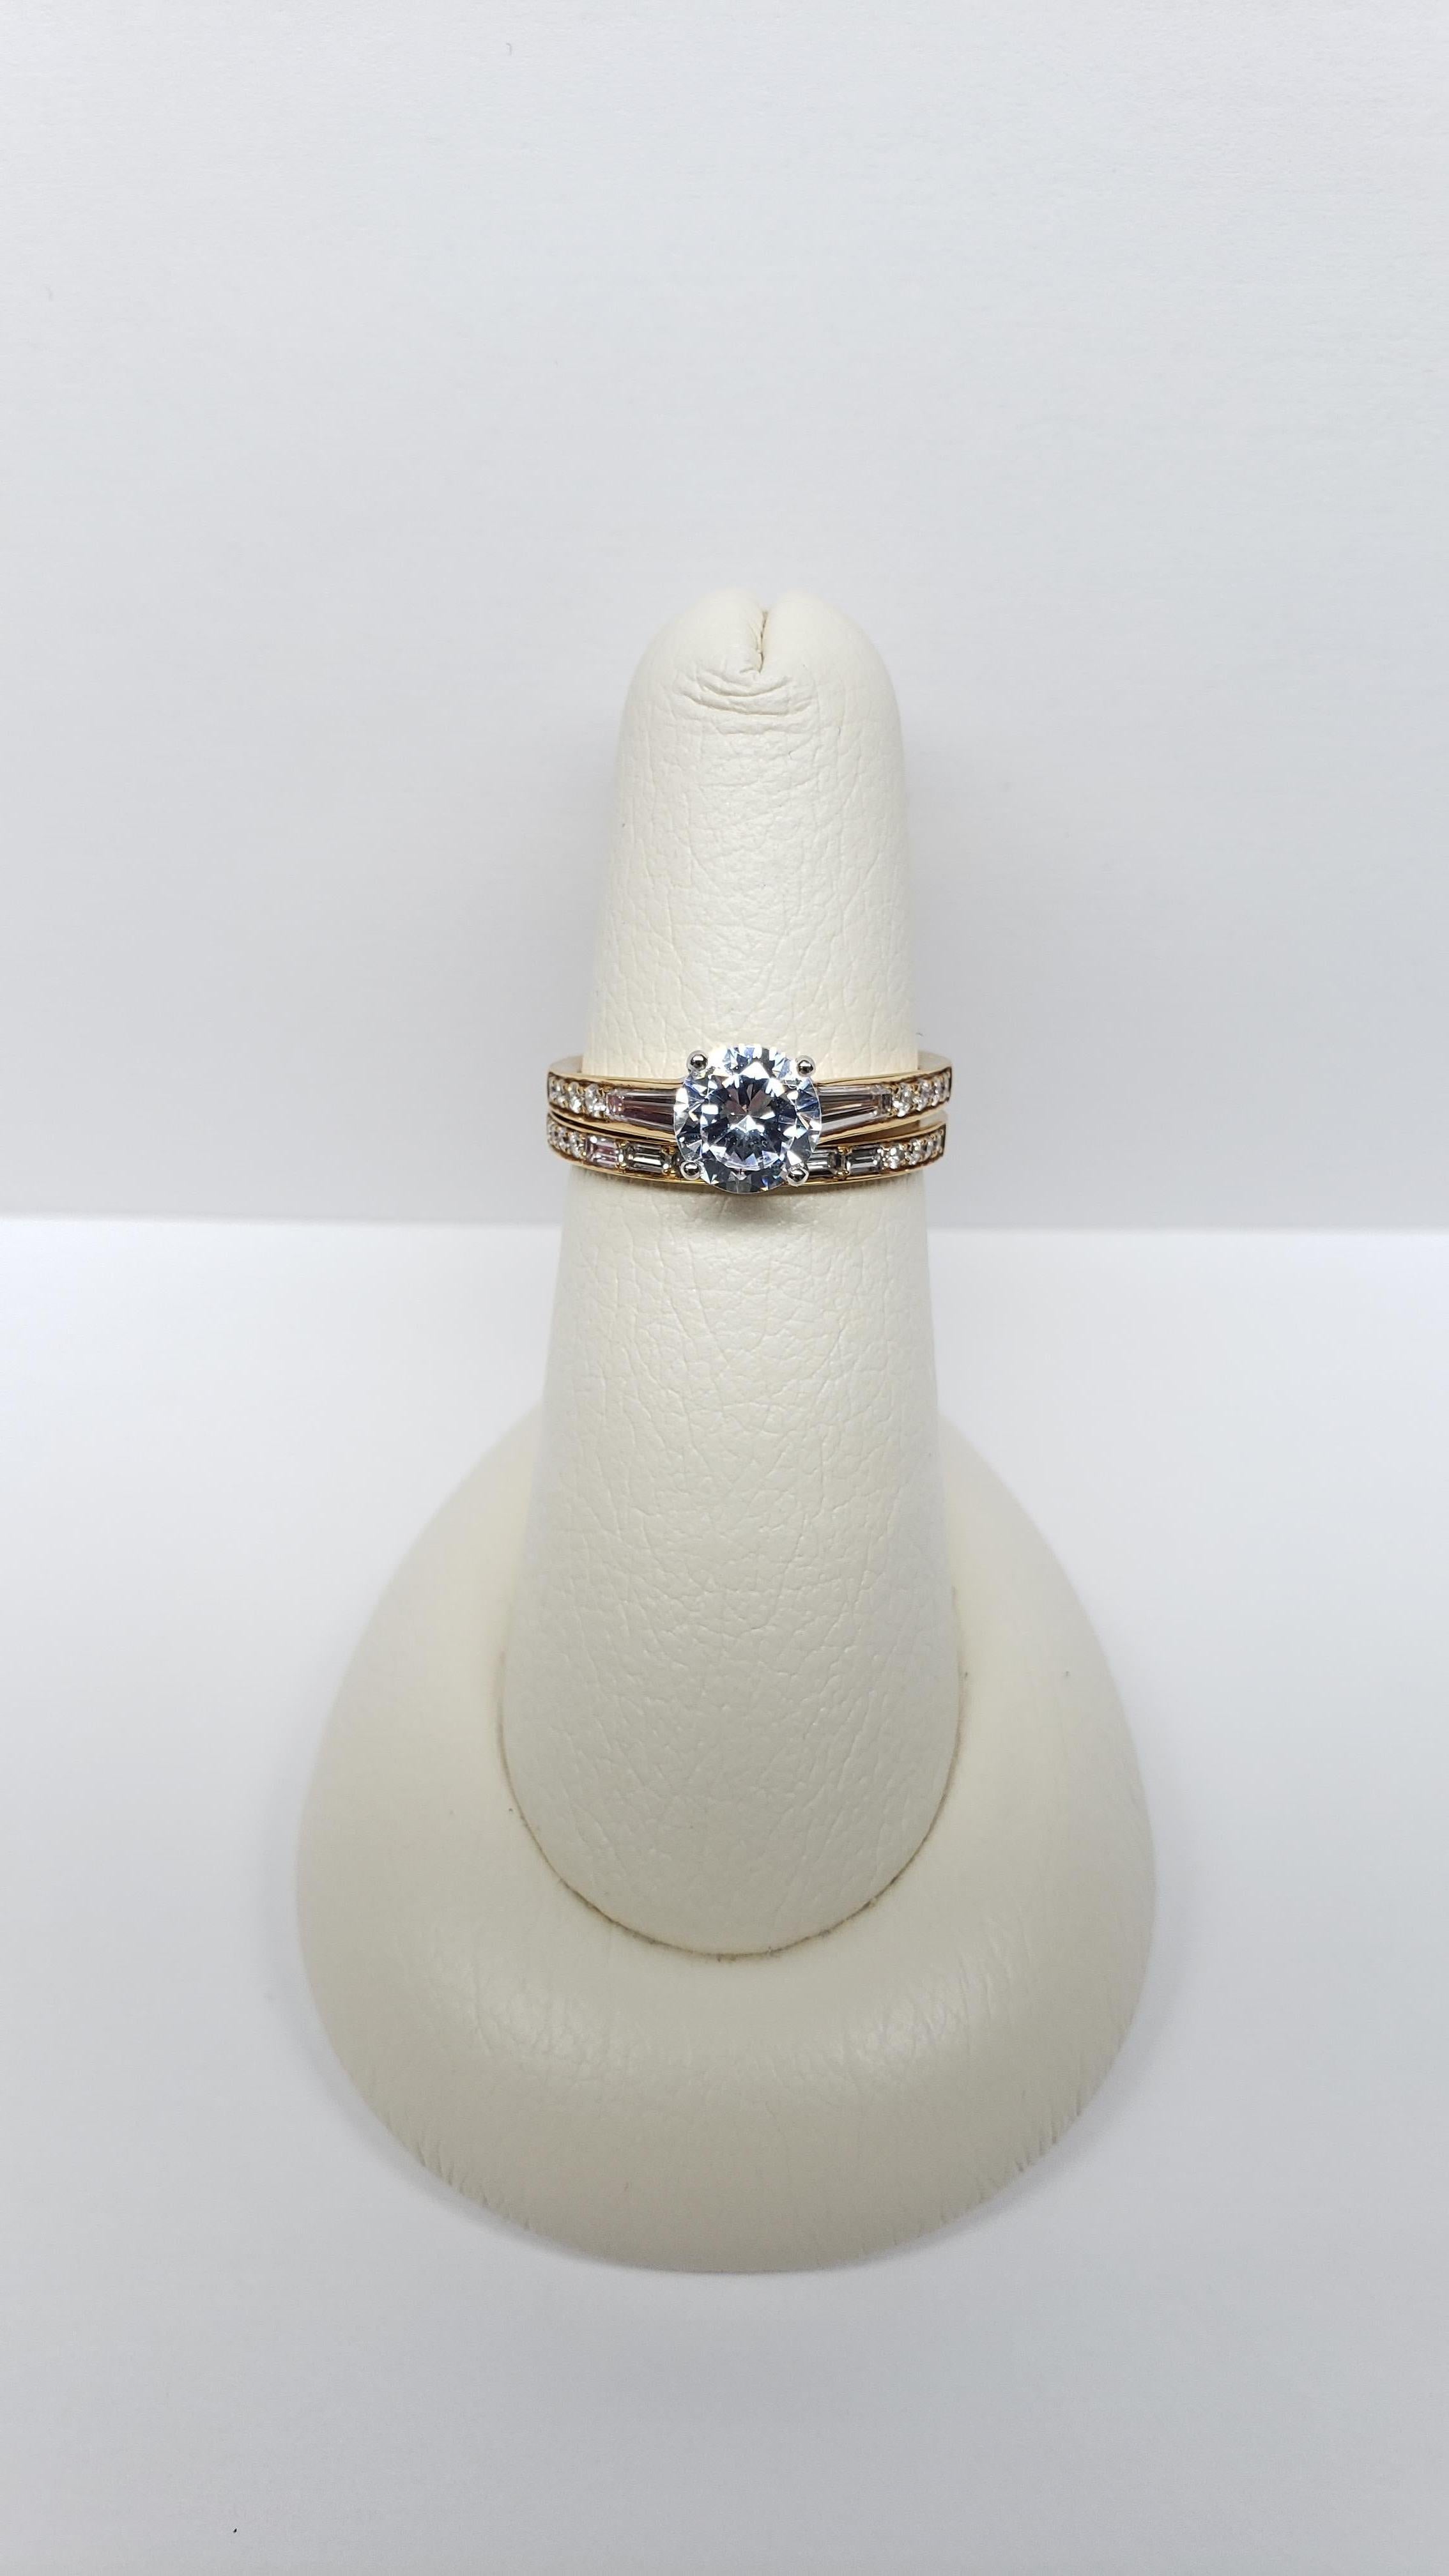 This wedding set was designed by Simon G. and made from 18k yellow gold with white gold prongs. It features and elegant tapered engagement band, and a classic diamond and gold wedding band, Both rings feature baguette and round brilliant diamonds in